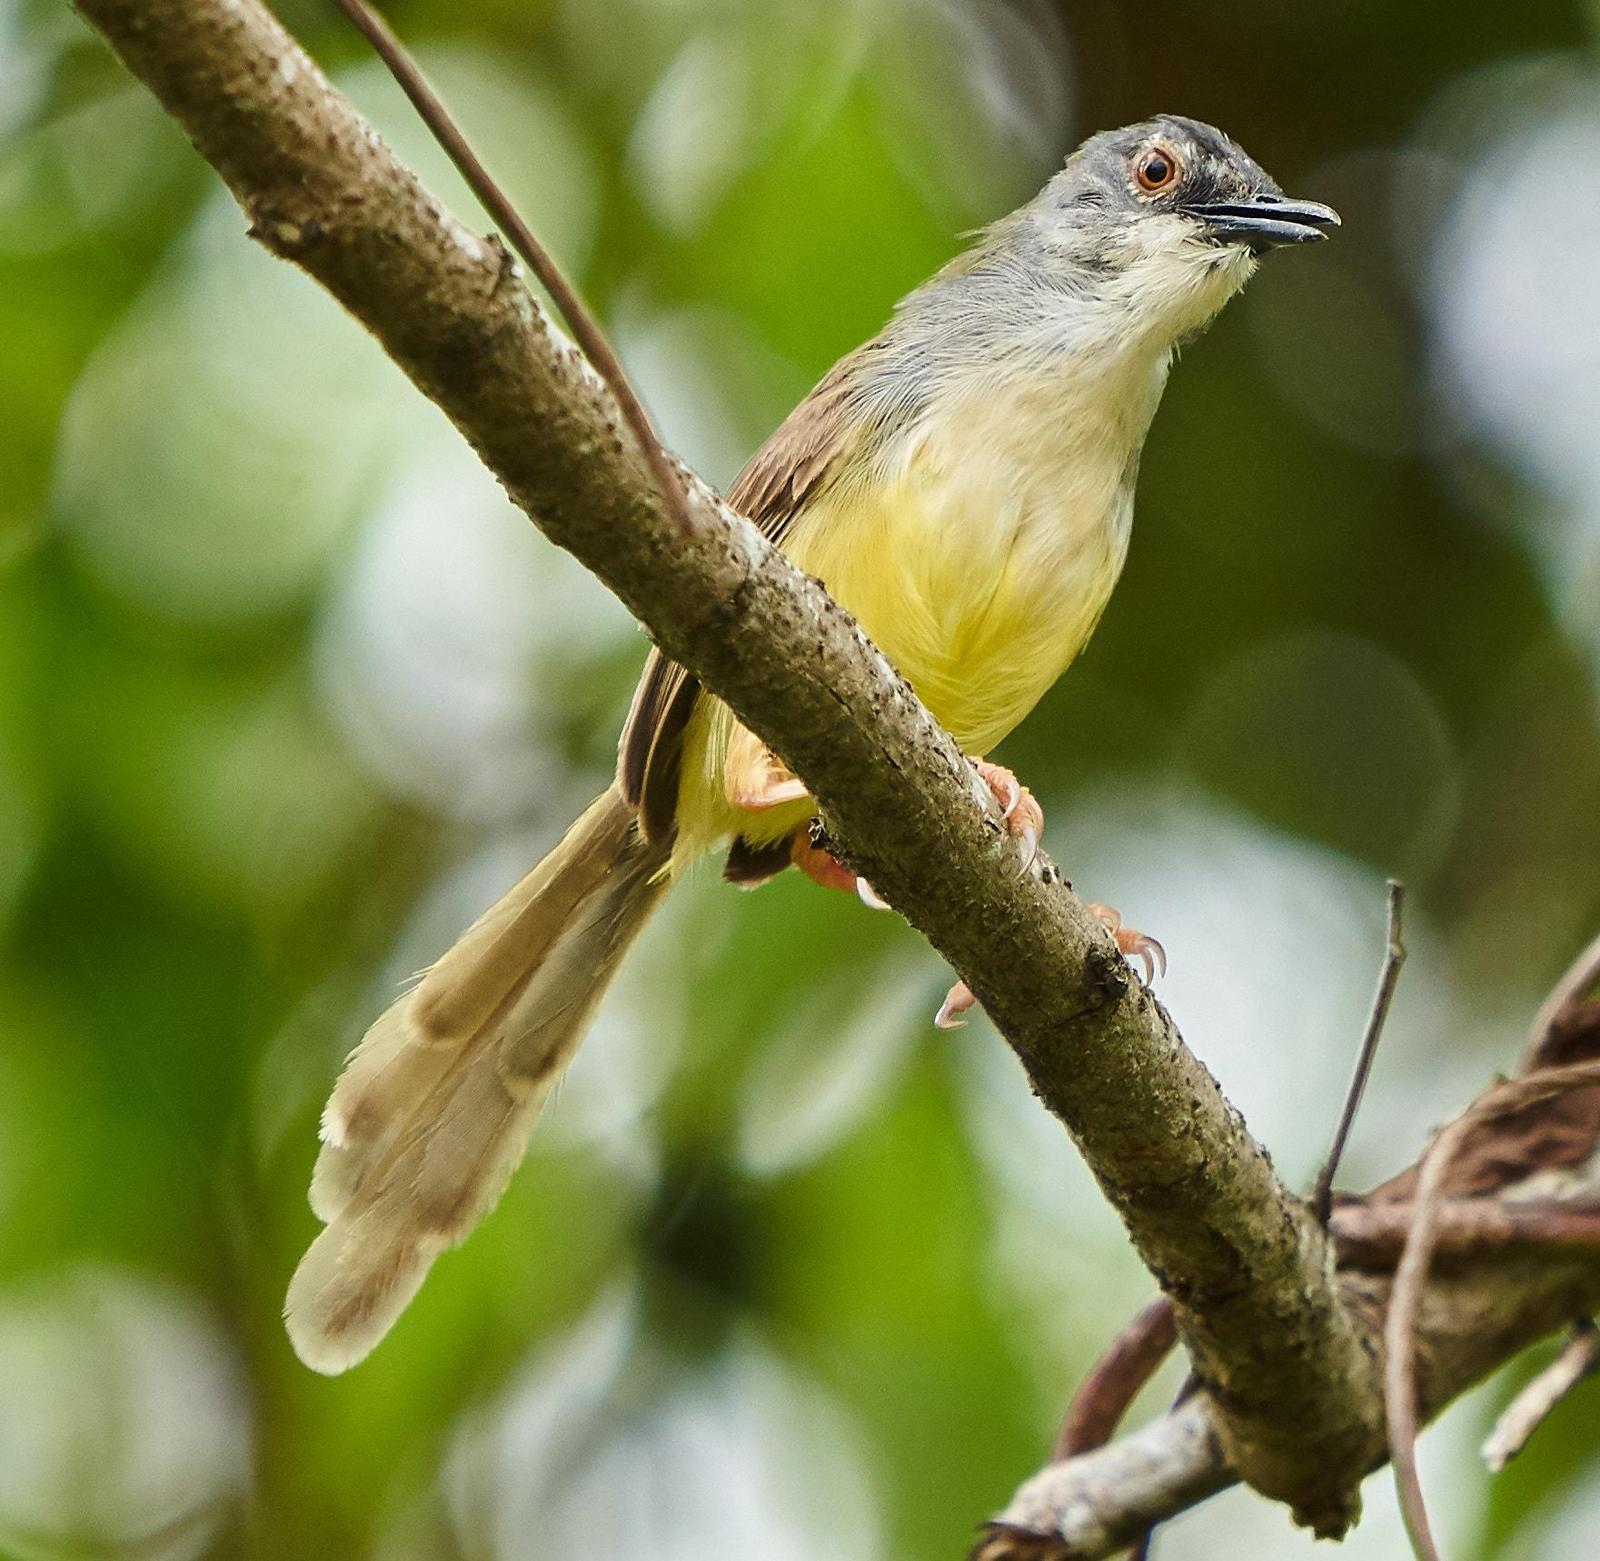 Yellow-bellied Prinia Photo by Steven Cheong